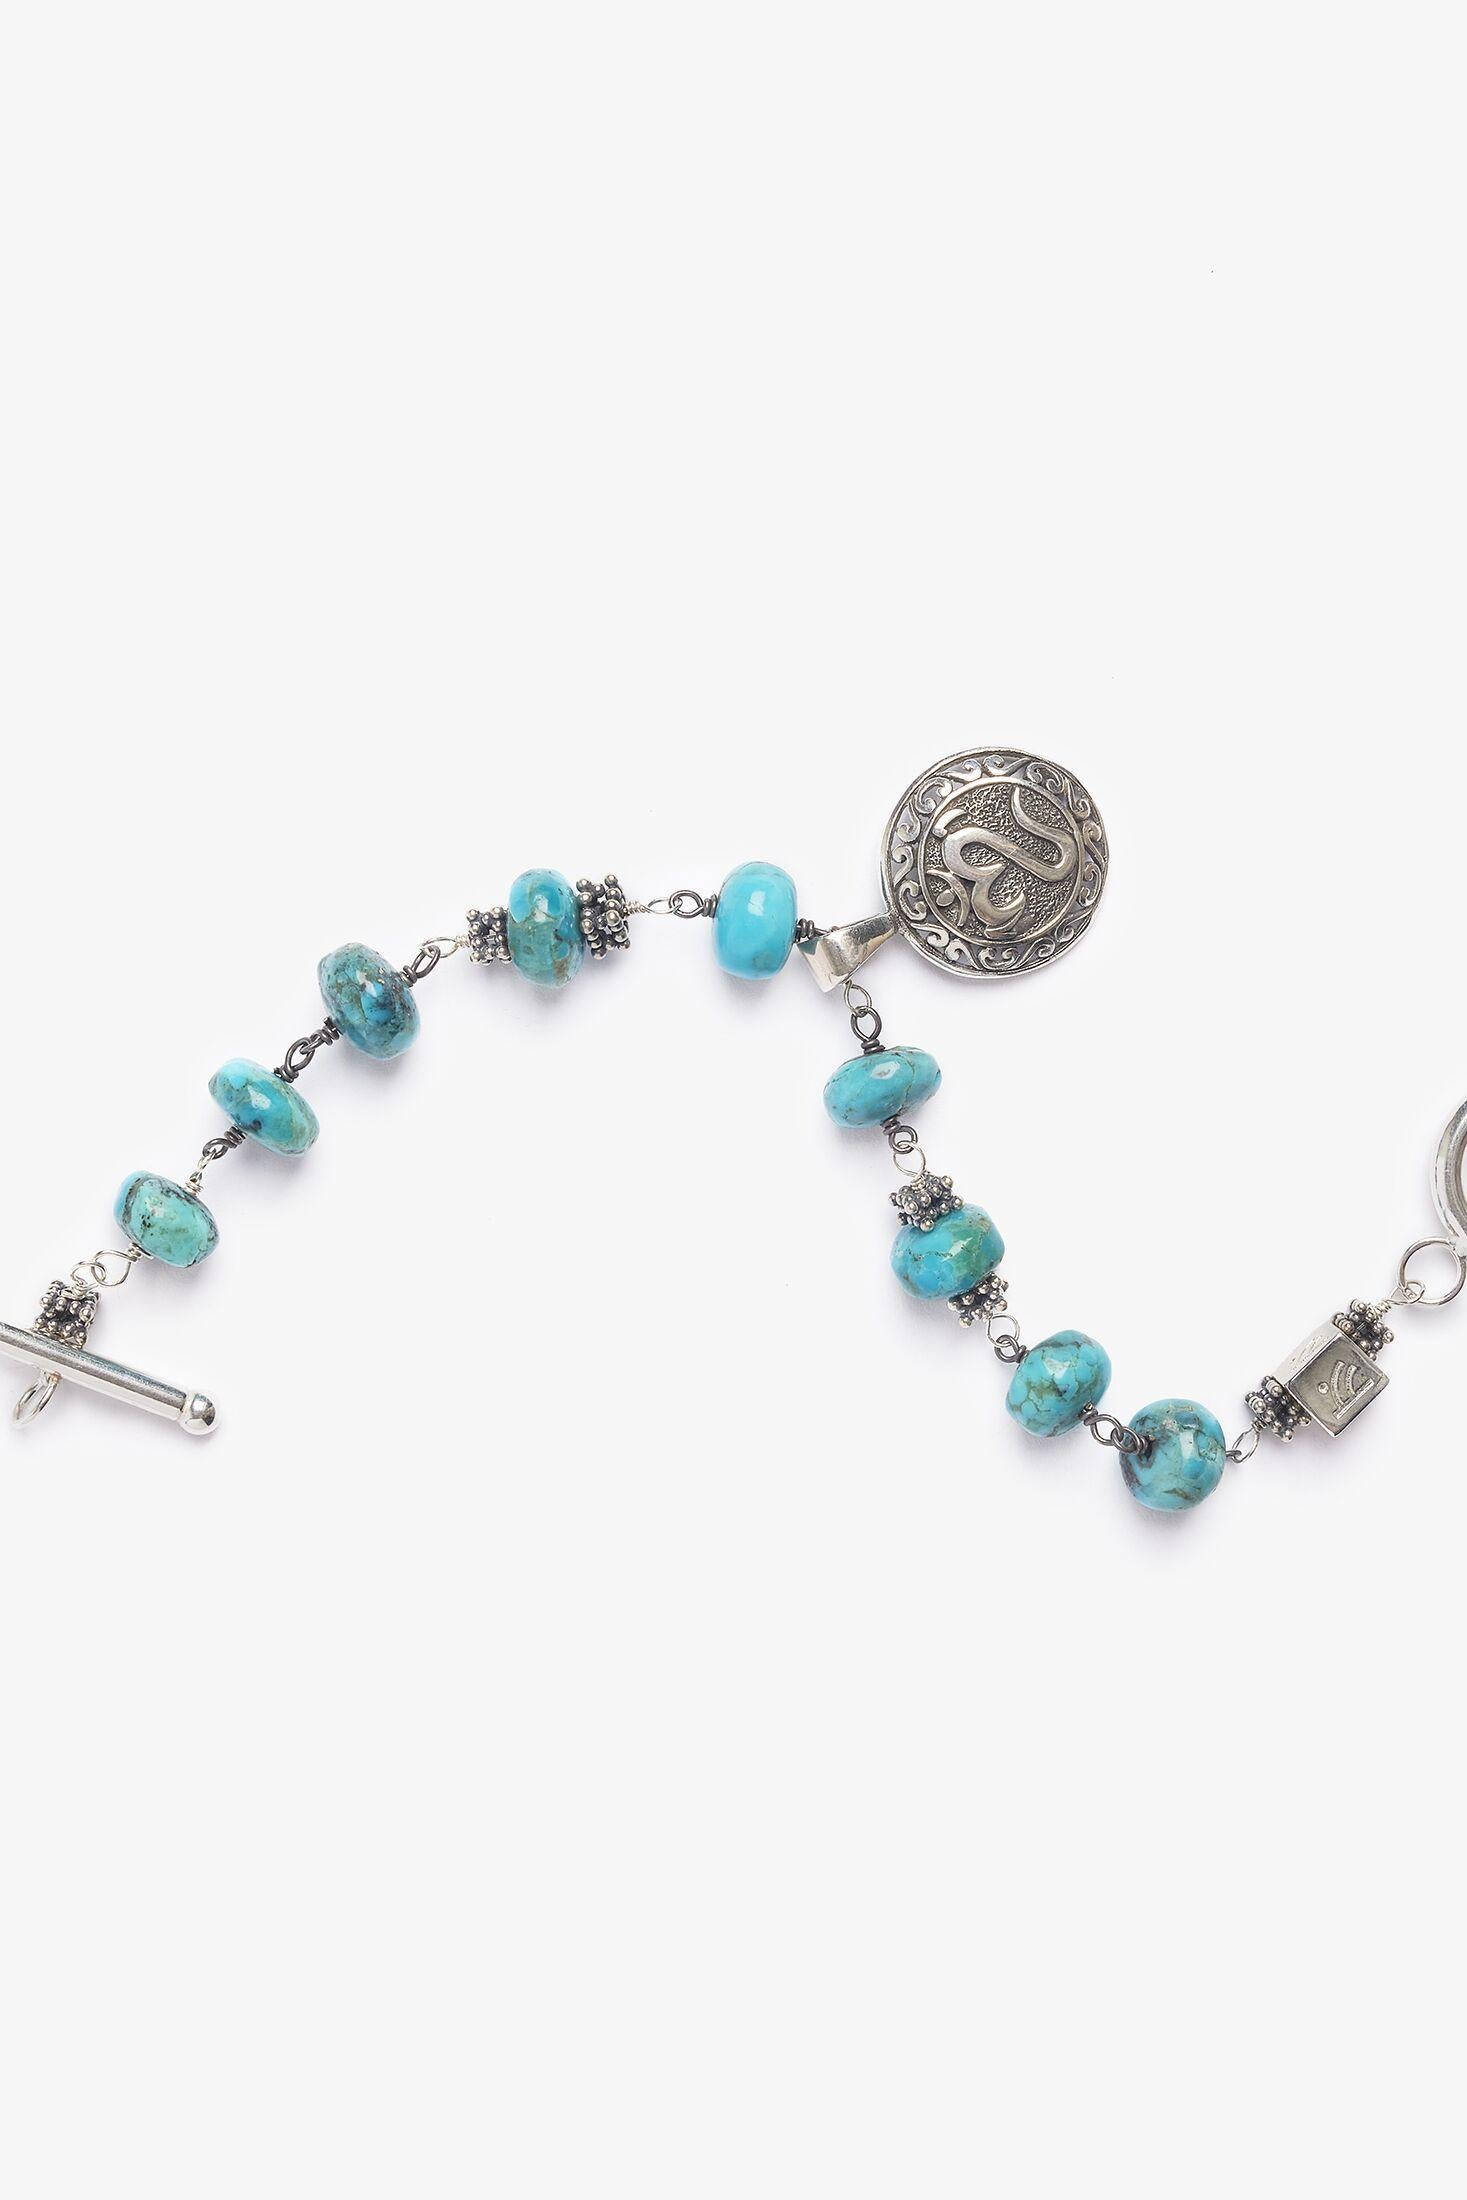 This piece is inspired by the beautiful beaches in Canguu, Bali and comprised of vibrant copper turquoise.  The bracelet is peppered with symbolism.  Pantai means beach in Indonesian.  The bracelet is adorned with a unique pendant is the Balinese OM